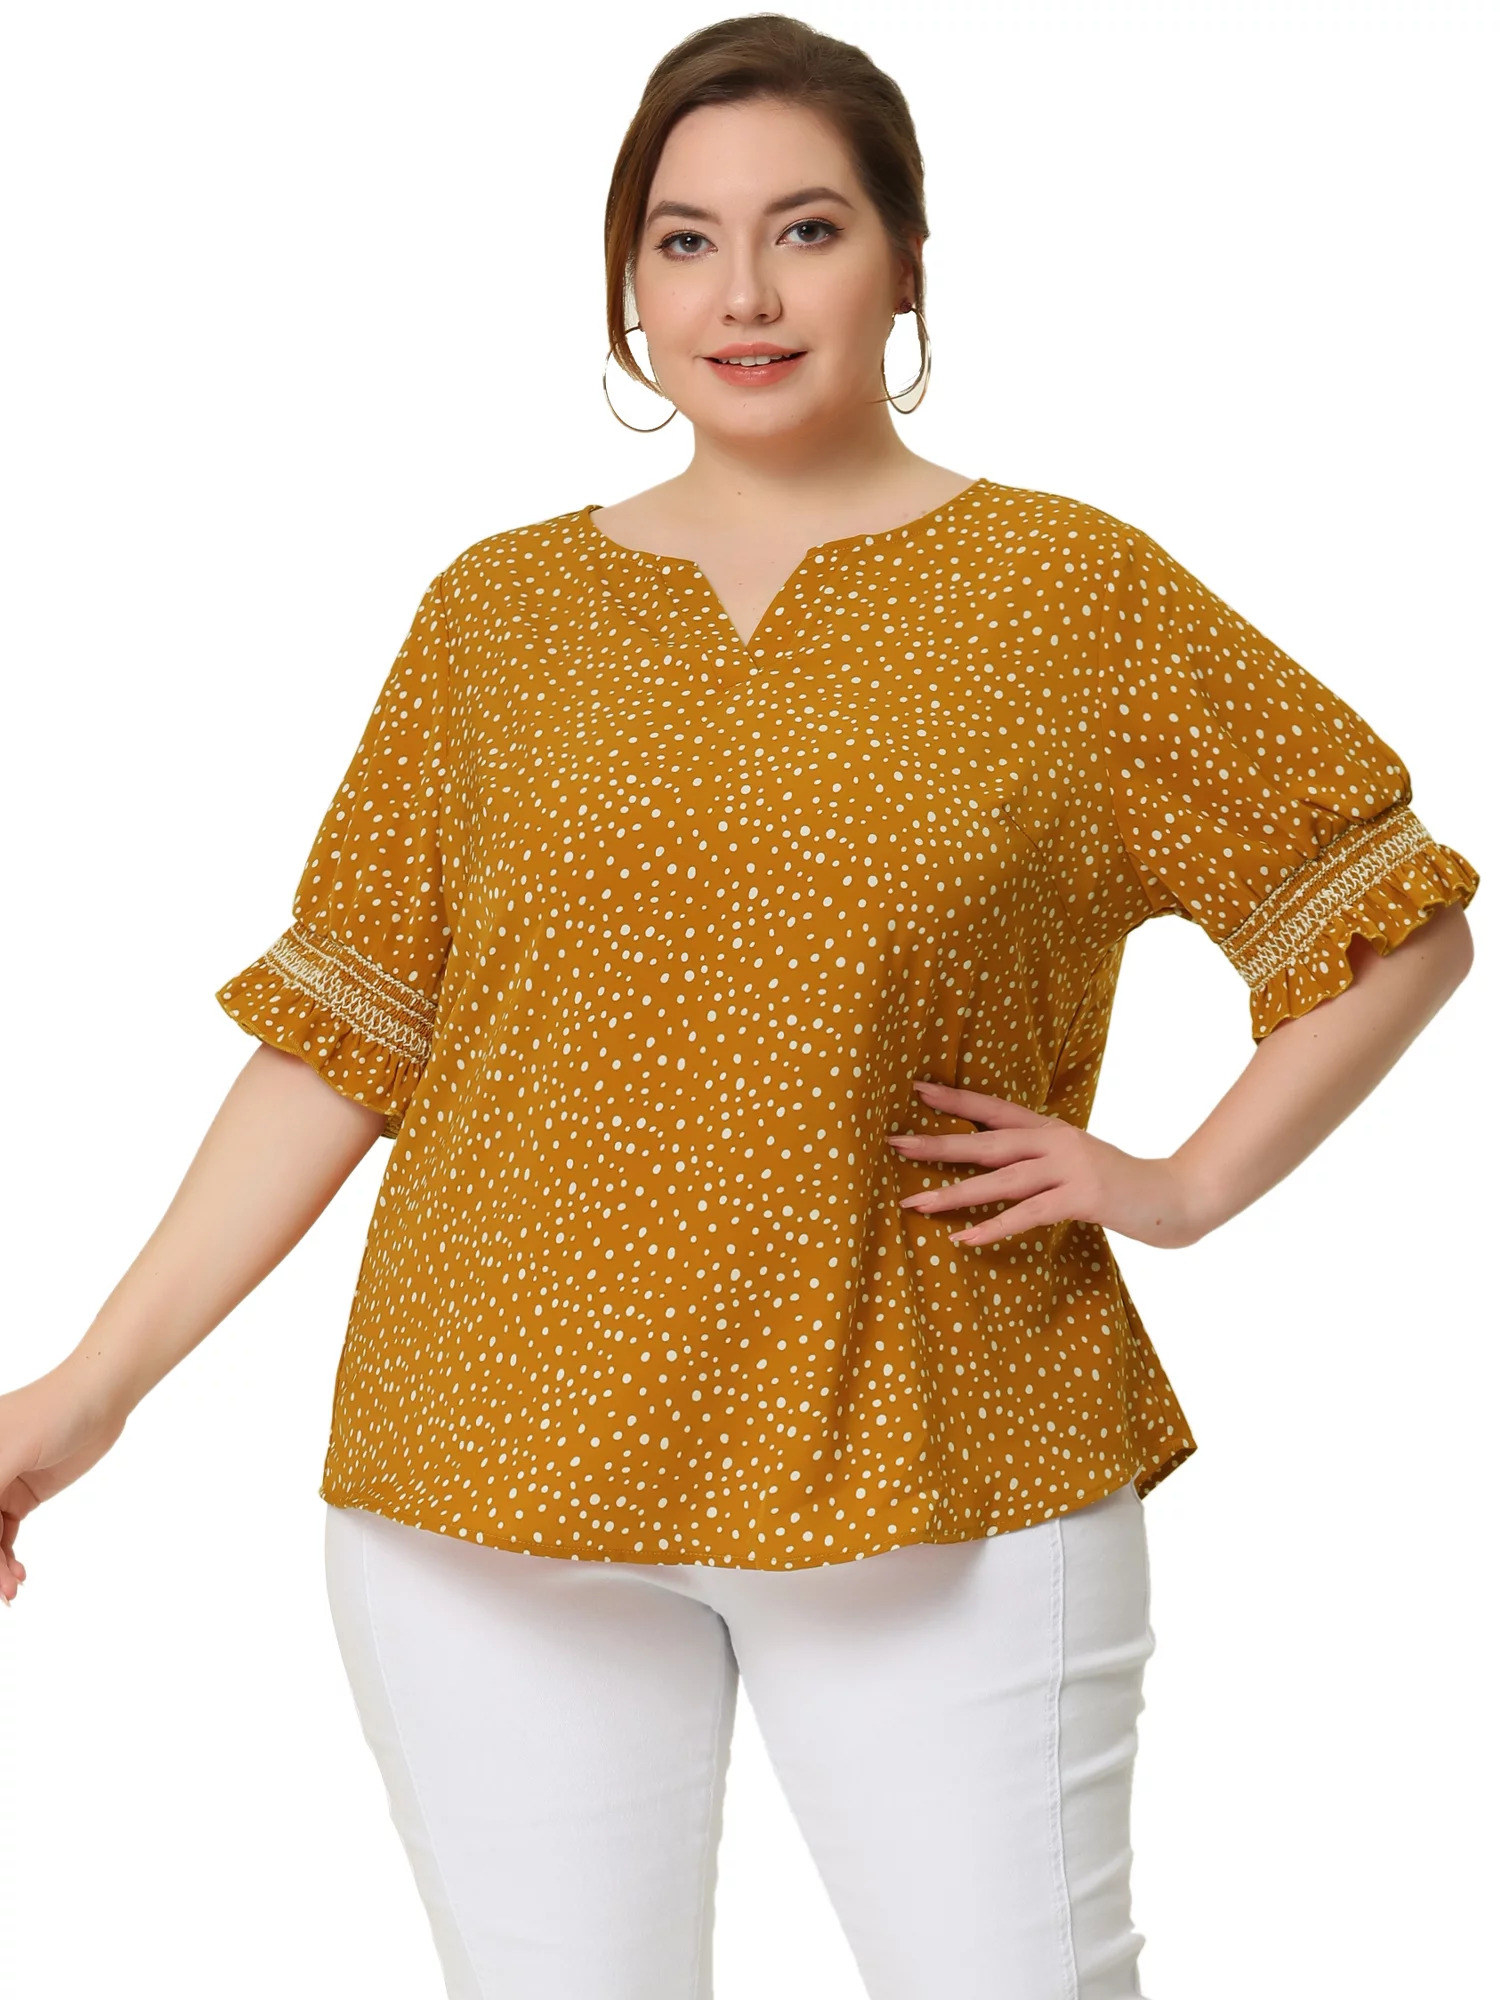 Model wearing the yellow dotted blouse